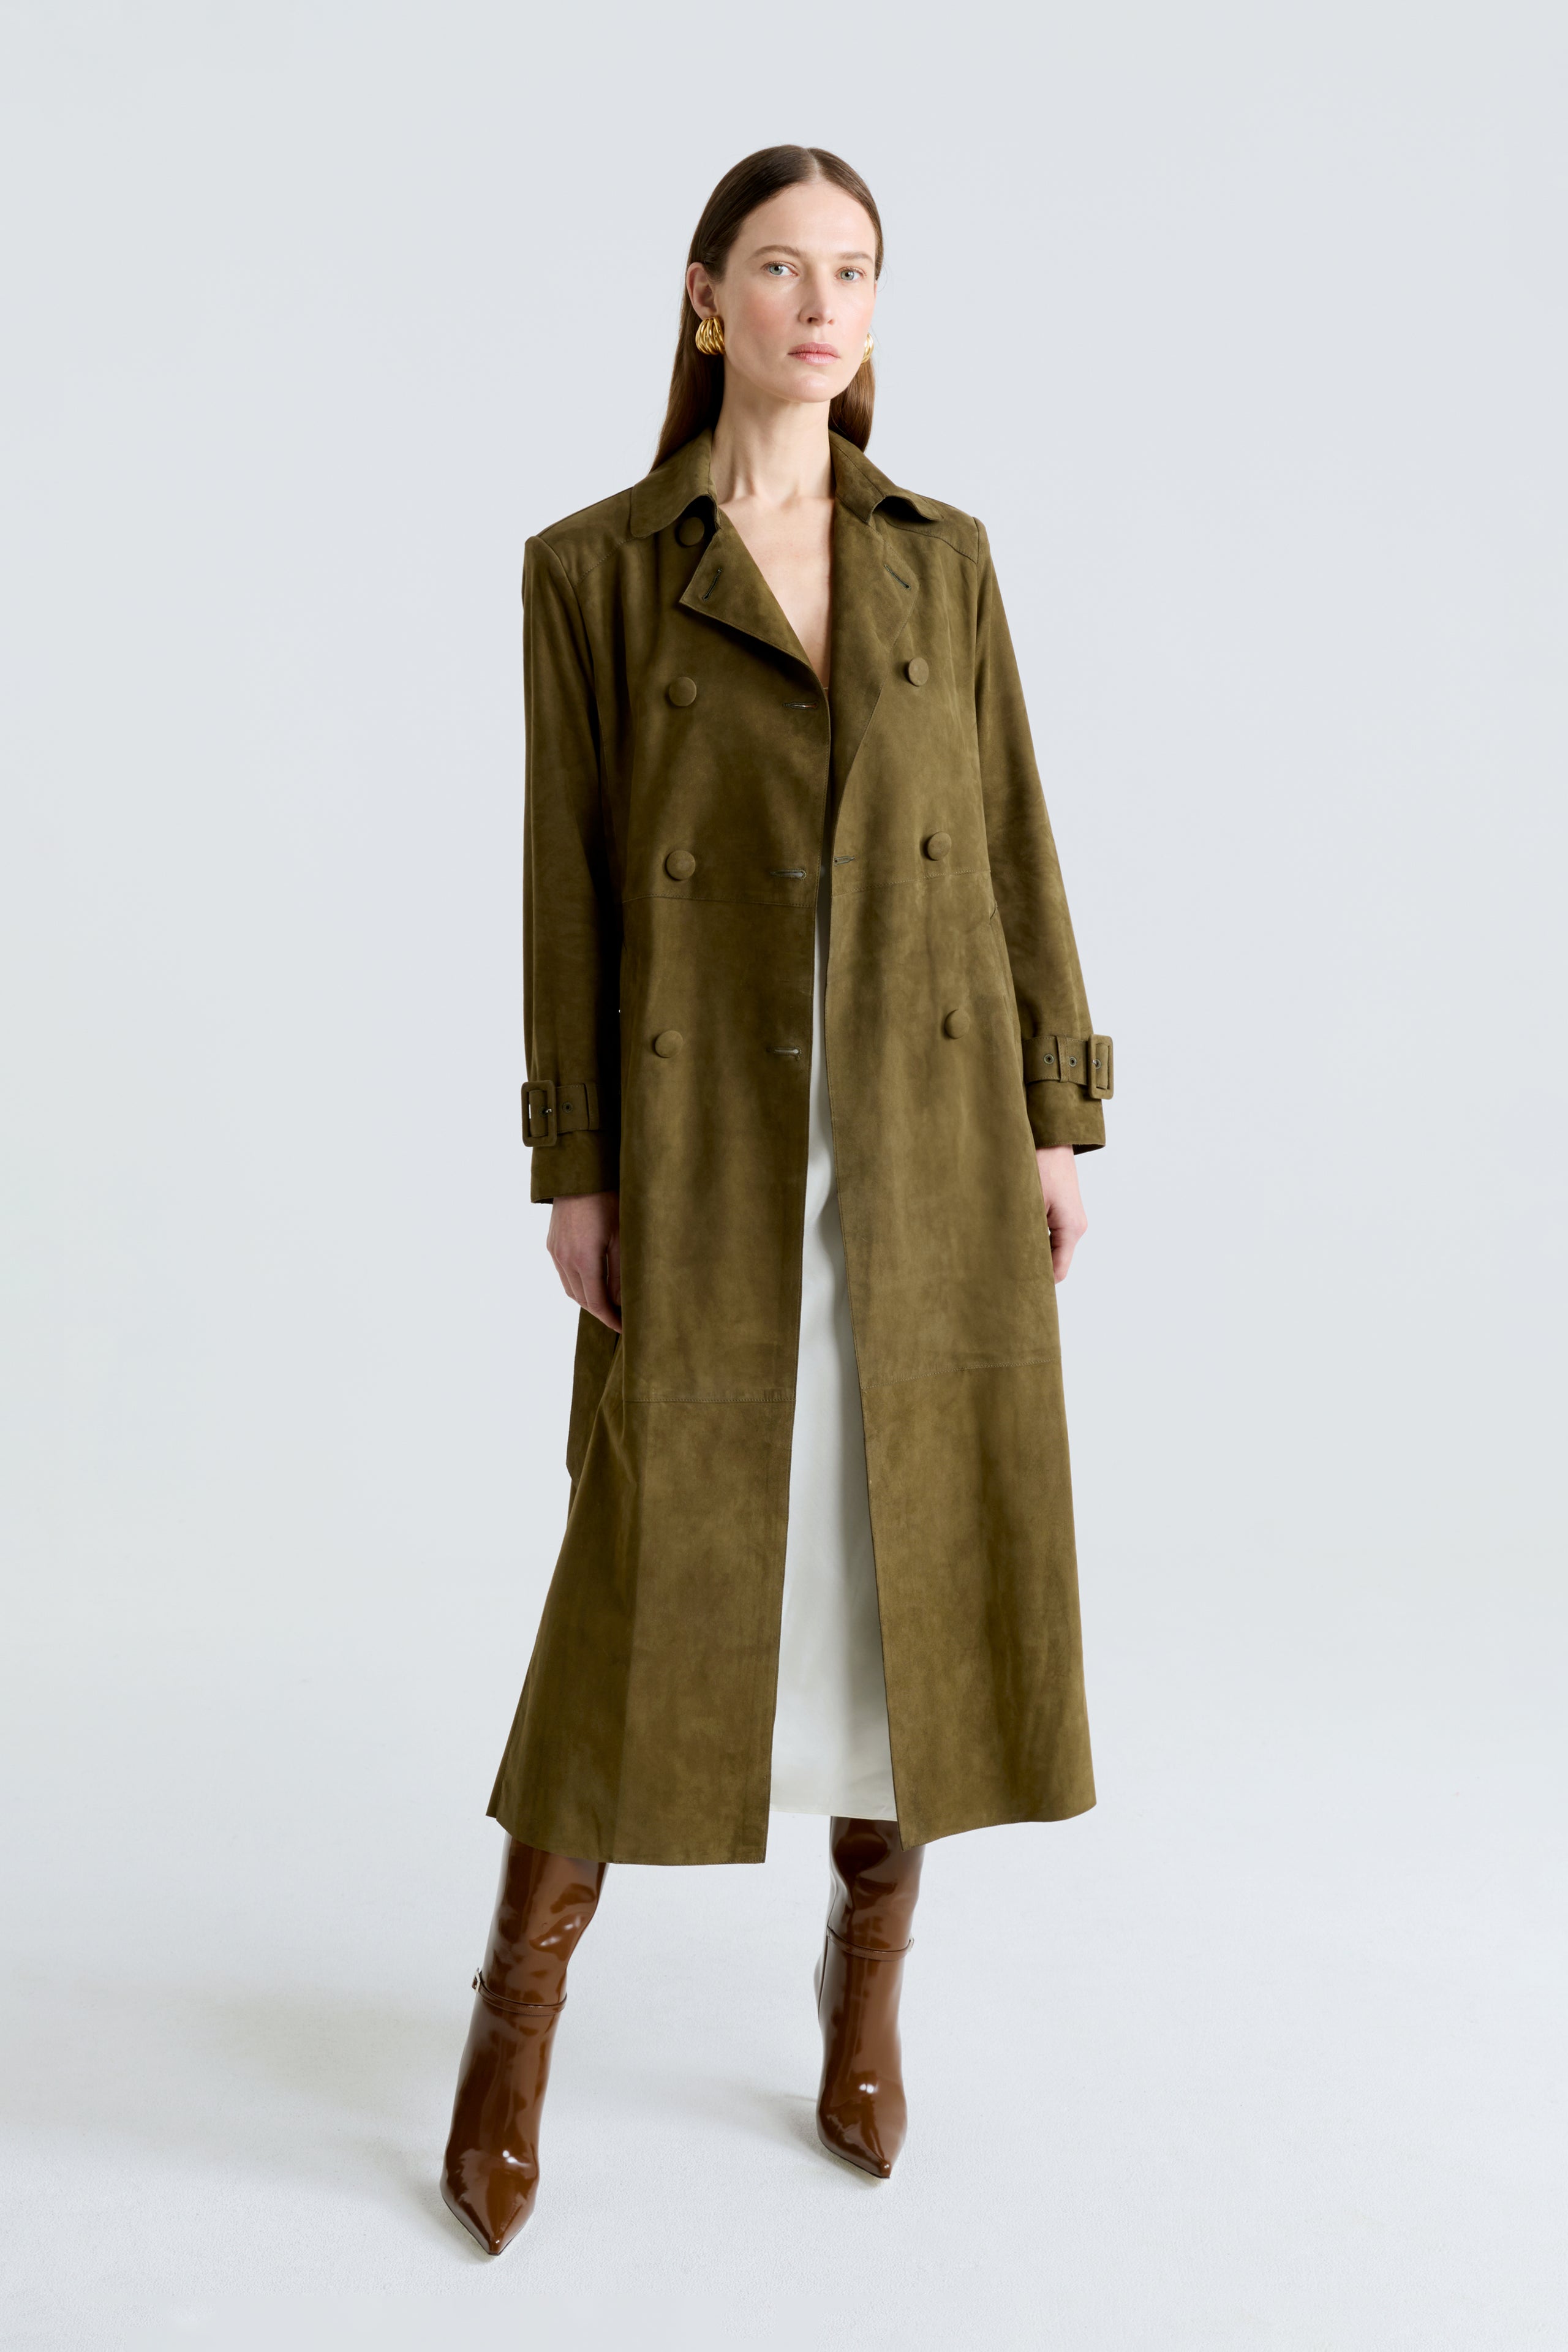 Model is wearing the Tate Olive Everyday Suede Trench Coat Front